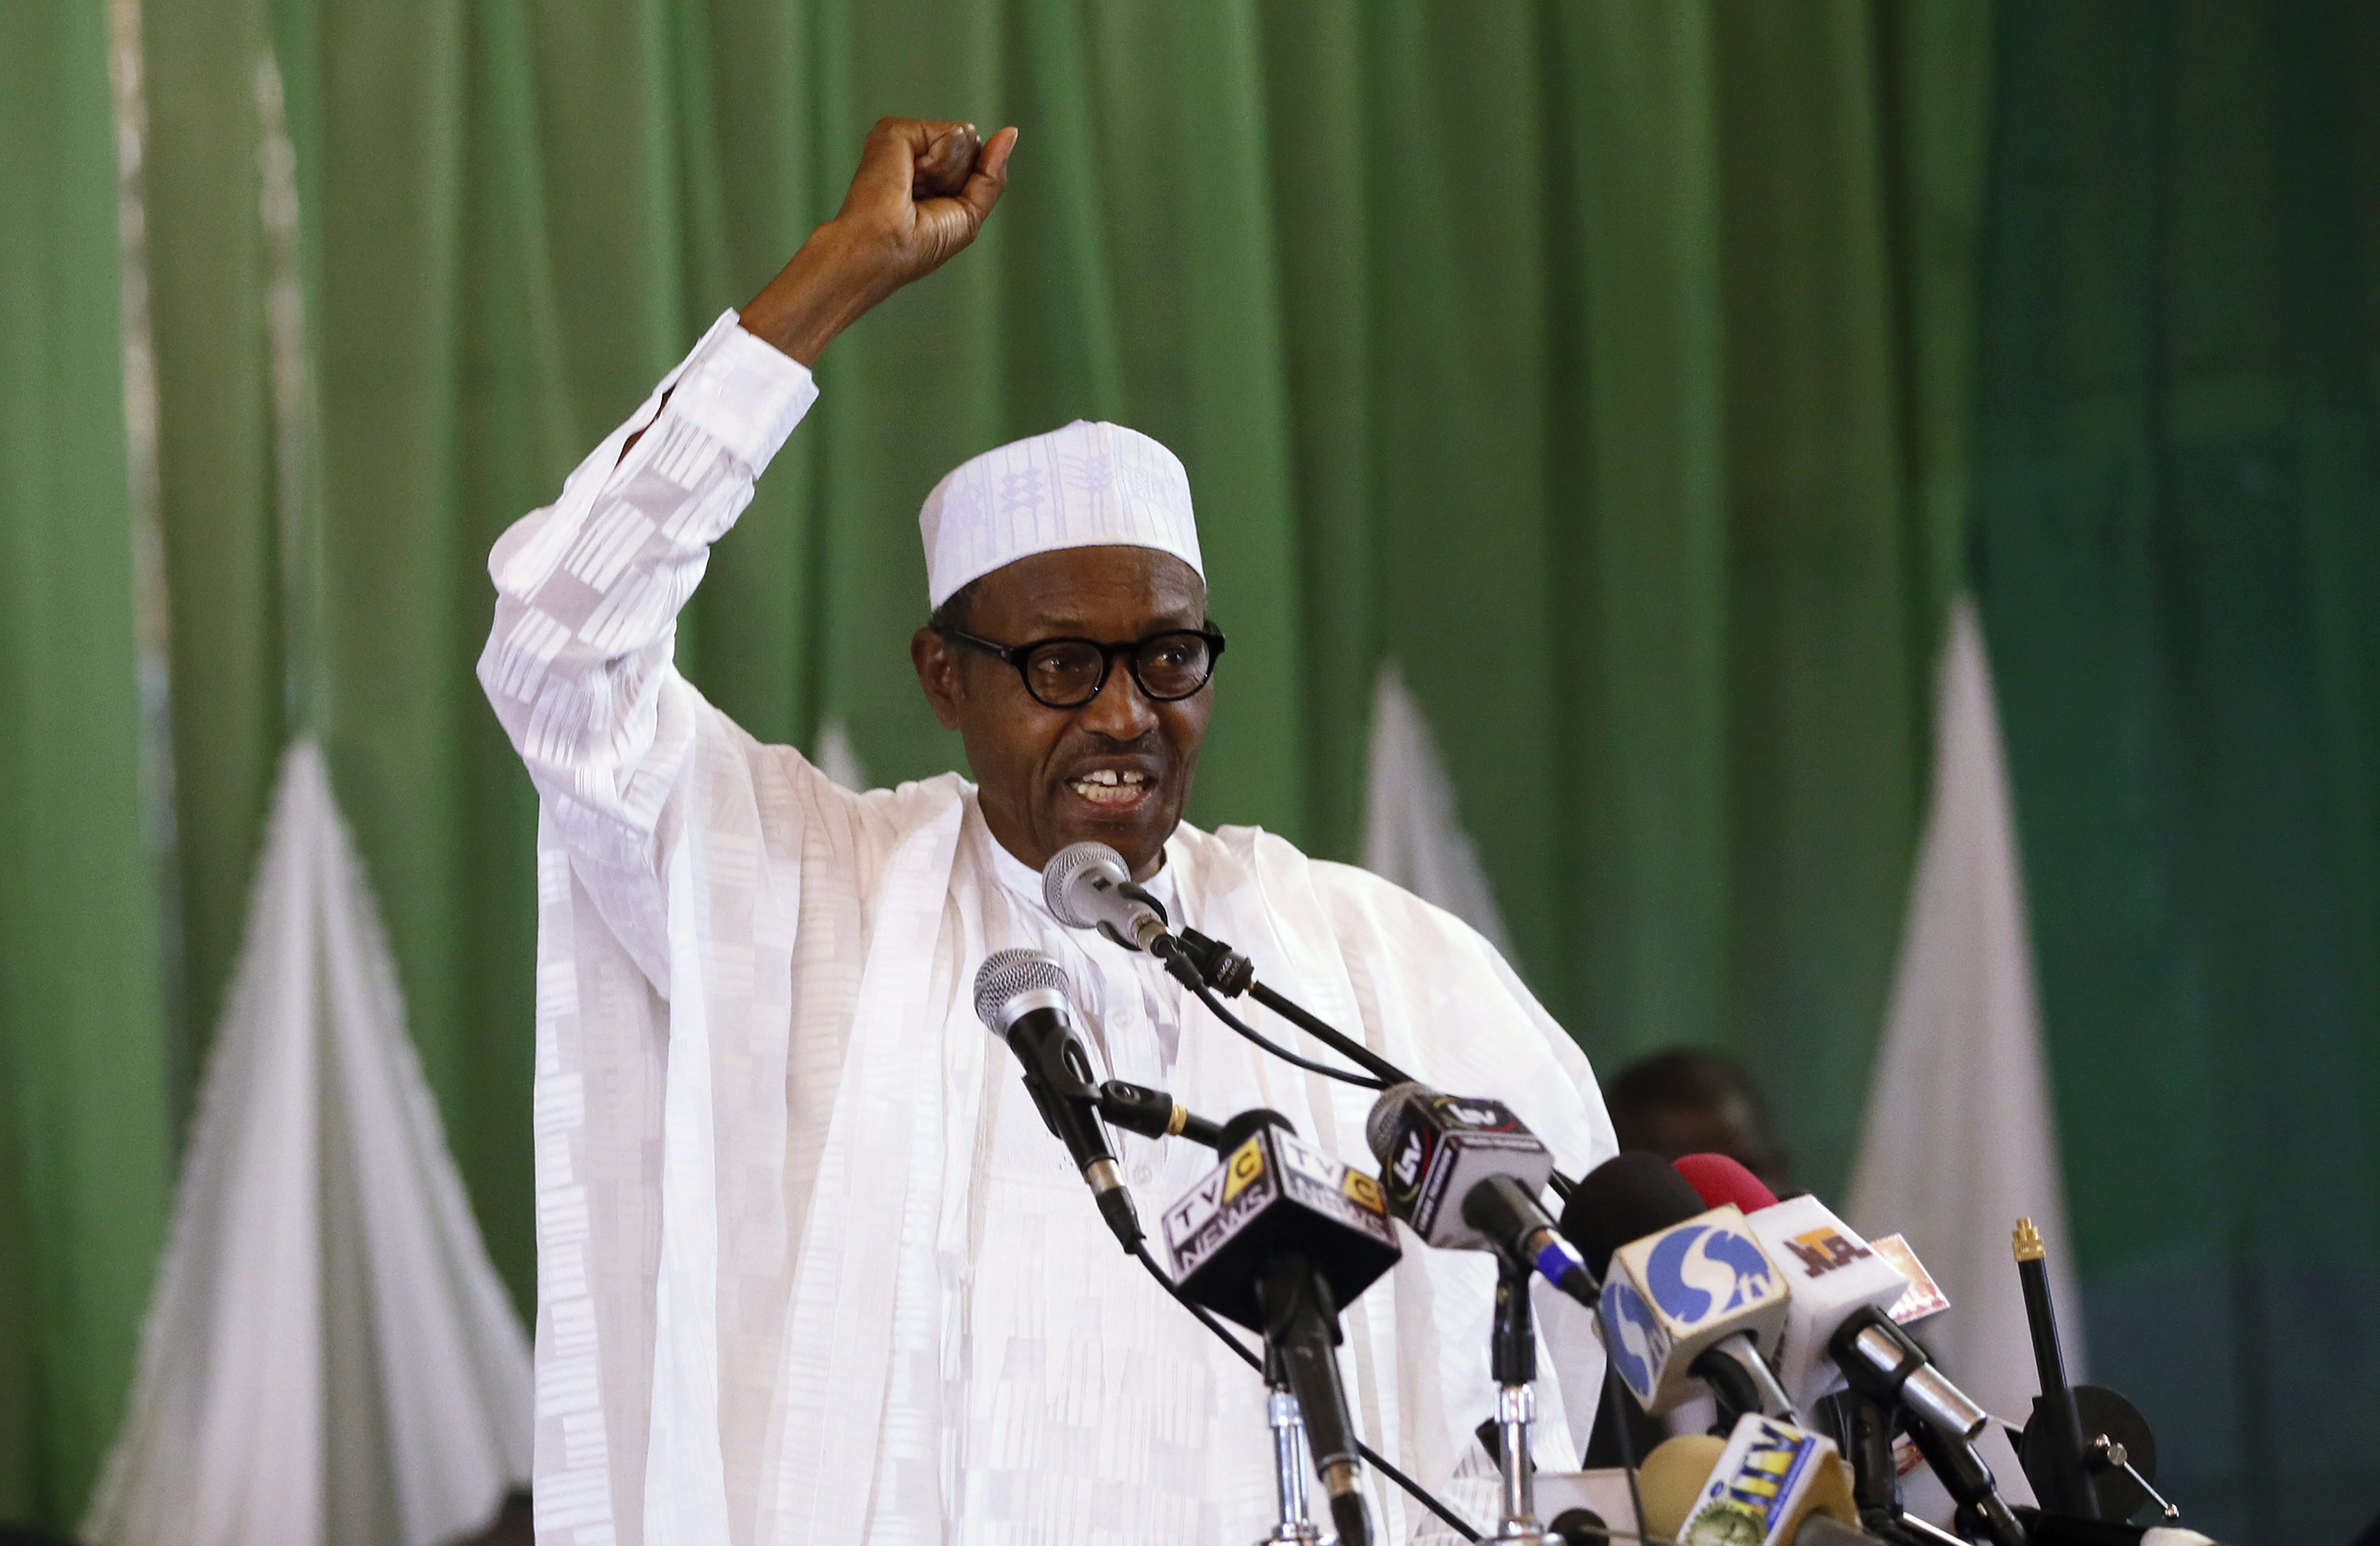 Buhari assures Nigerians: The pains’ll soon be over